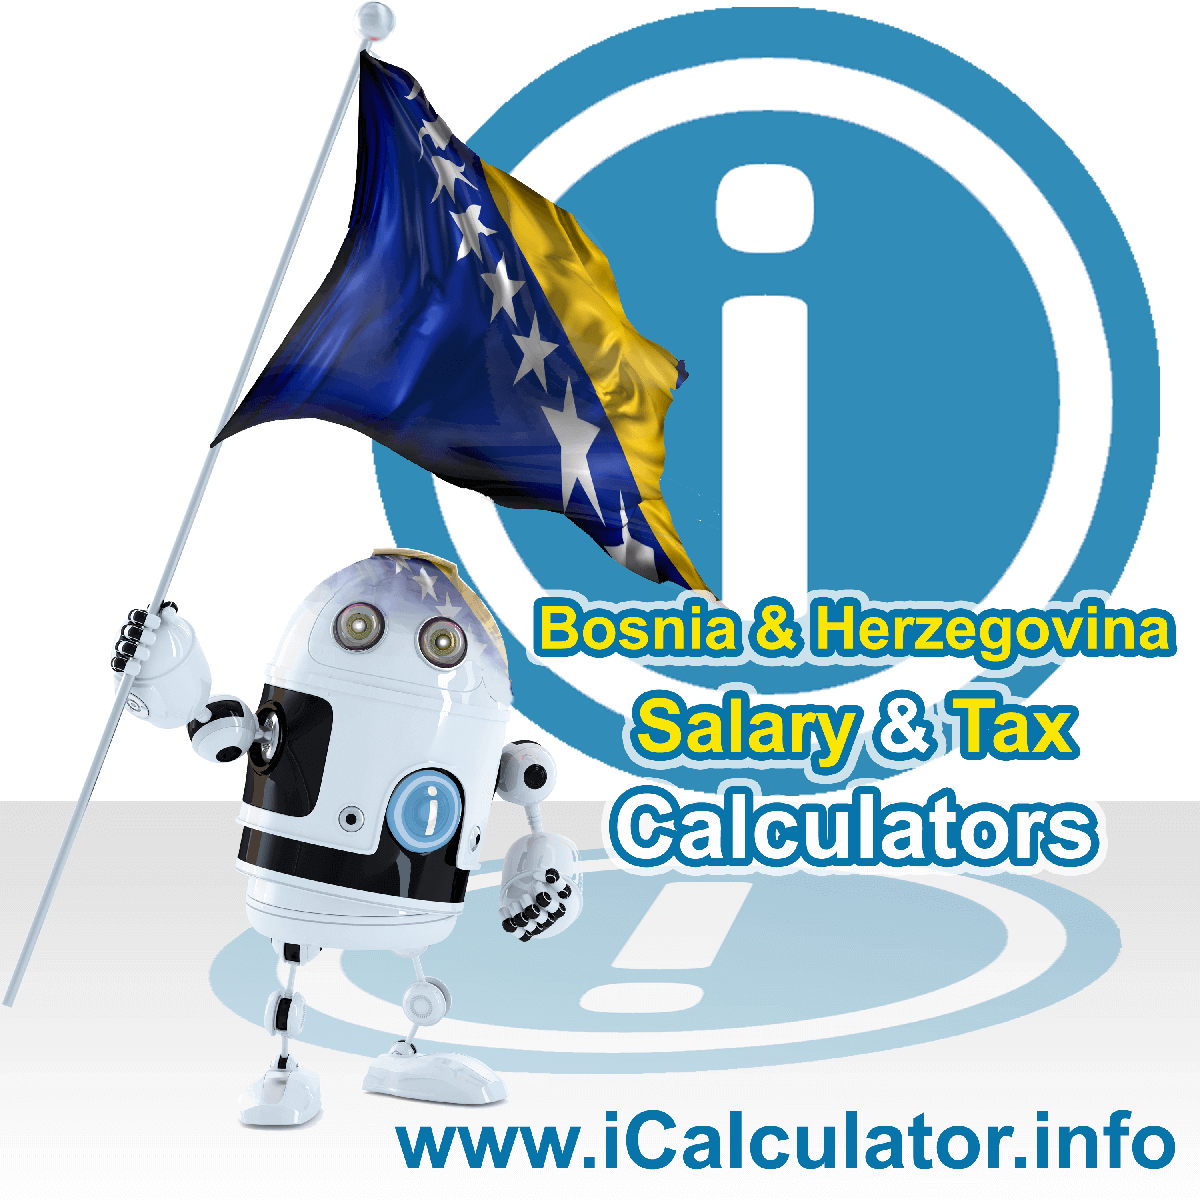 Bosnia And Herzegovina Tax Calculator. This image shows the Bosnia And Herzegovina flag and information relating to the tax formula for the Bosnia And Herzegovina Salary Calculator